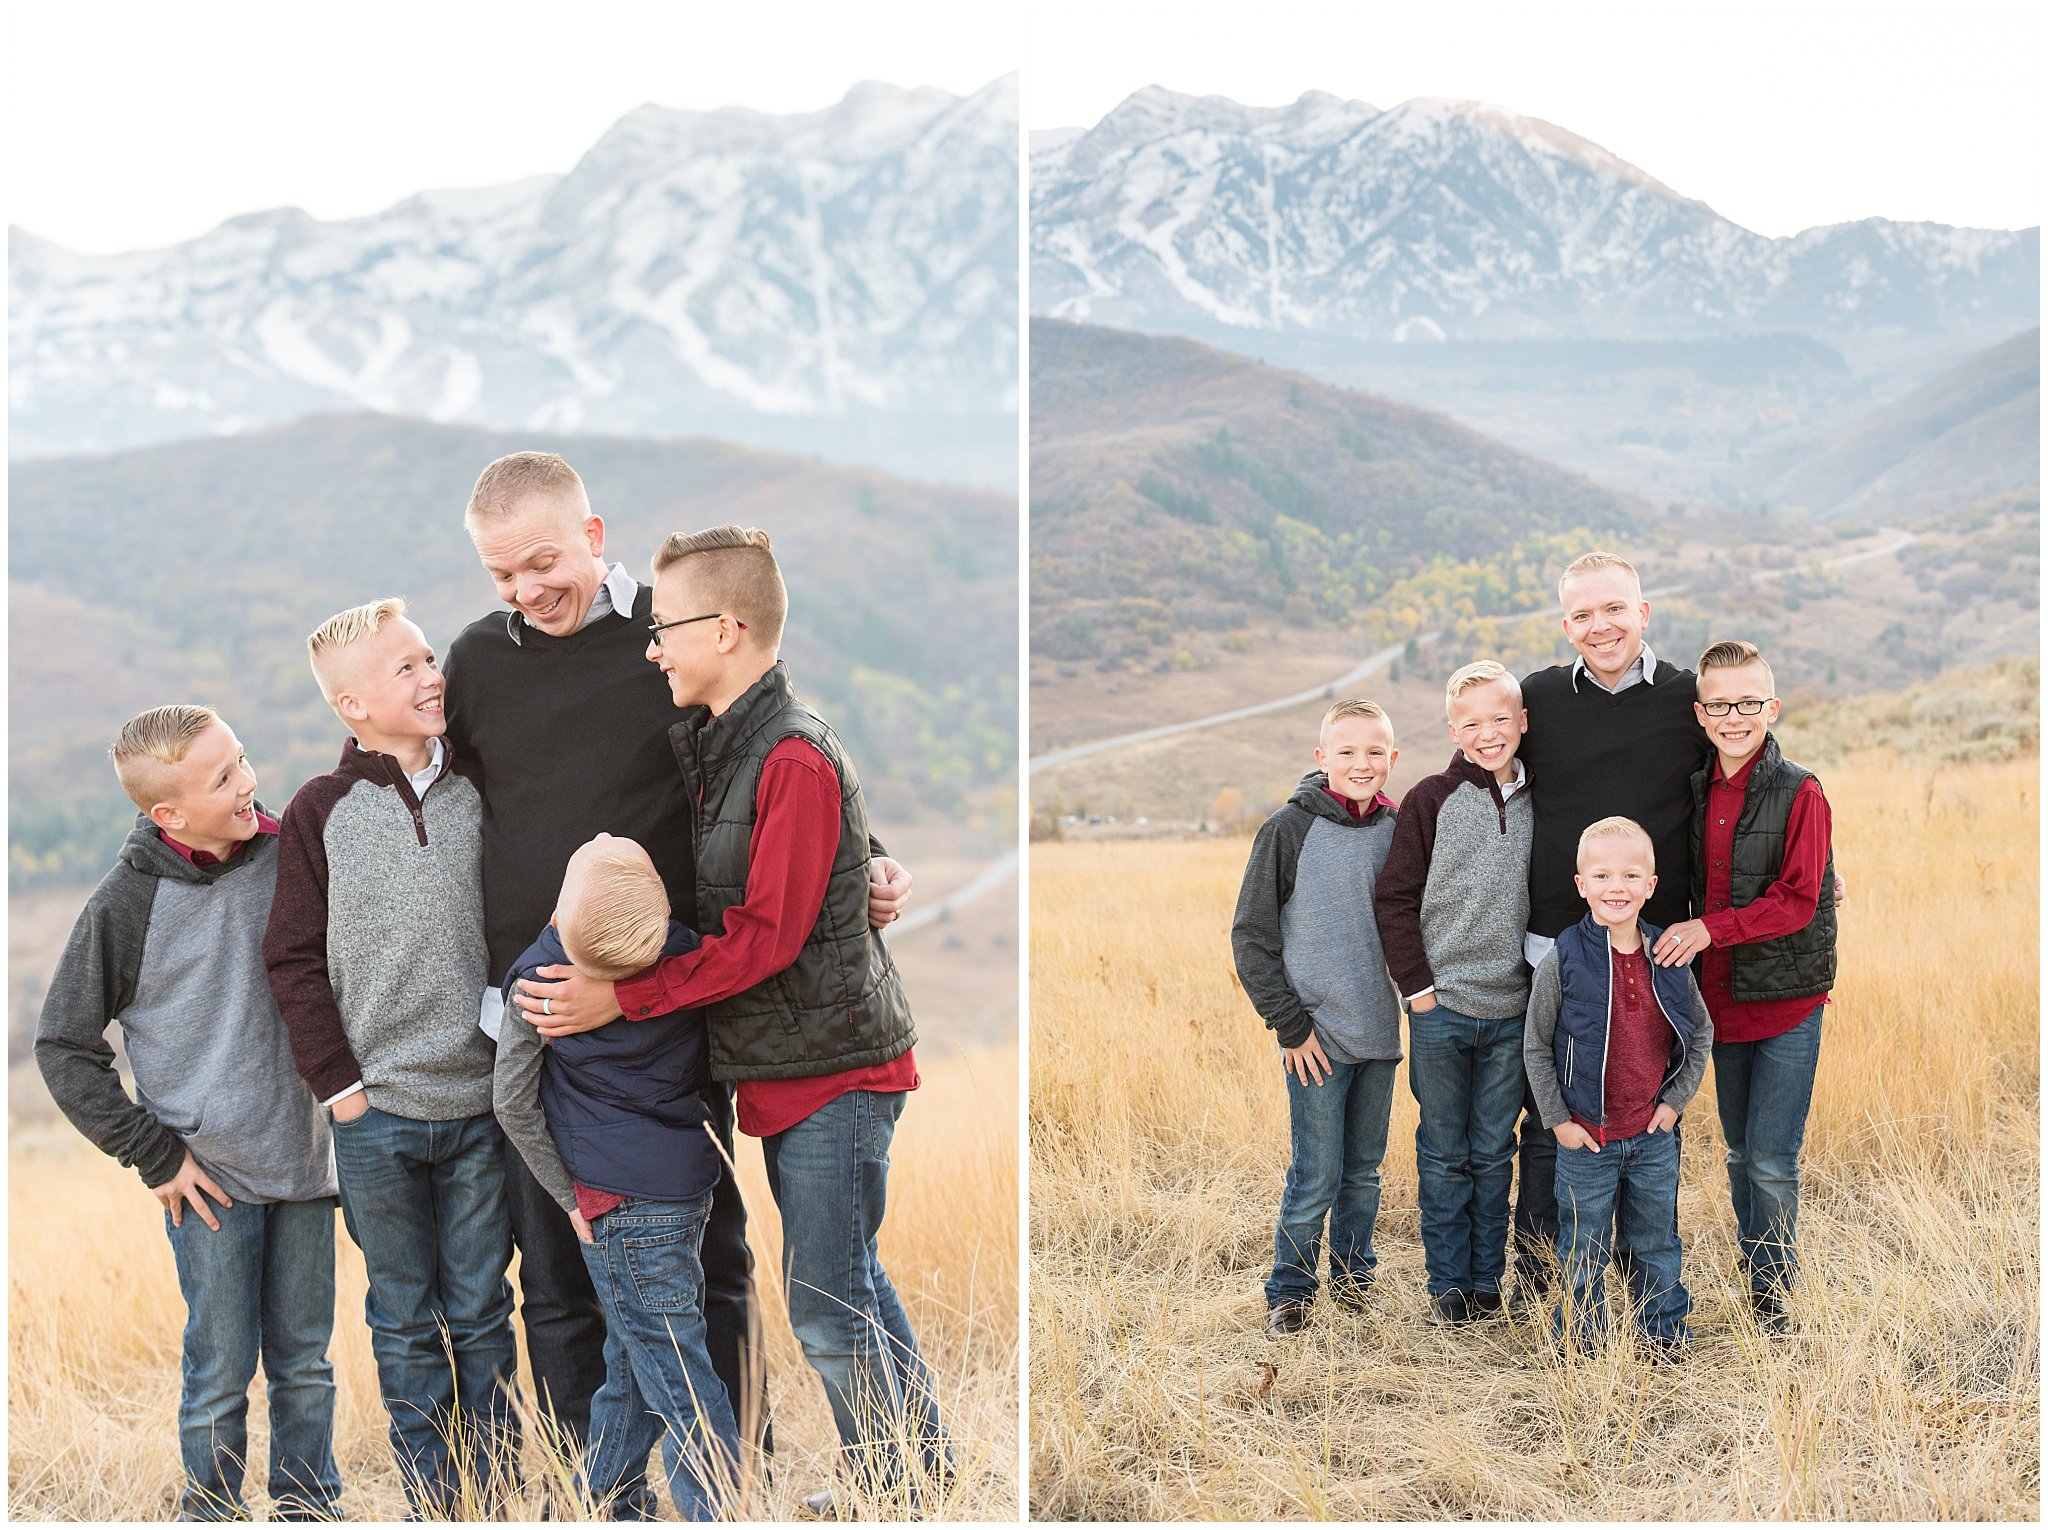 Dad with sons laughing in front of snowy mountains | Fall Family Pictures in the Mountains | Snowbasin, Utah | Jessie and Dallin Photography